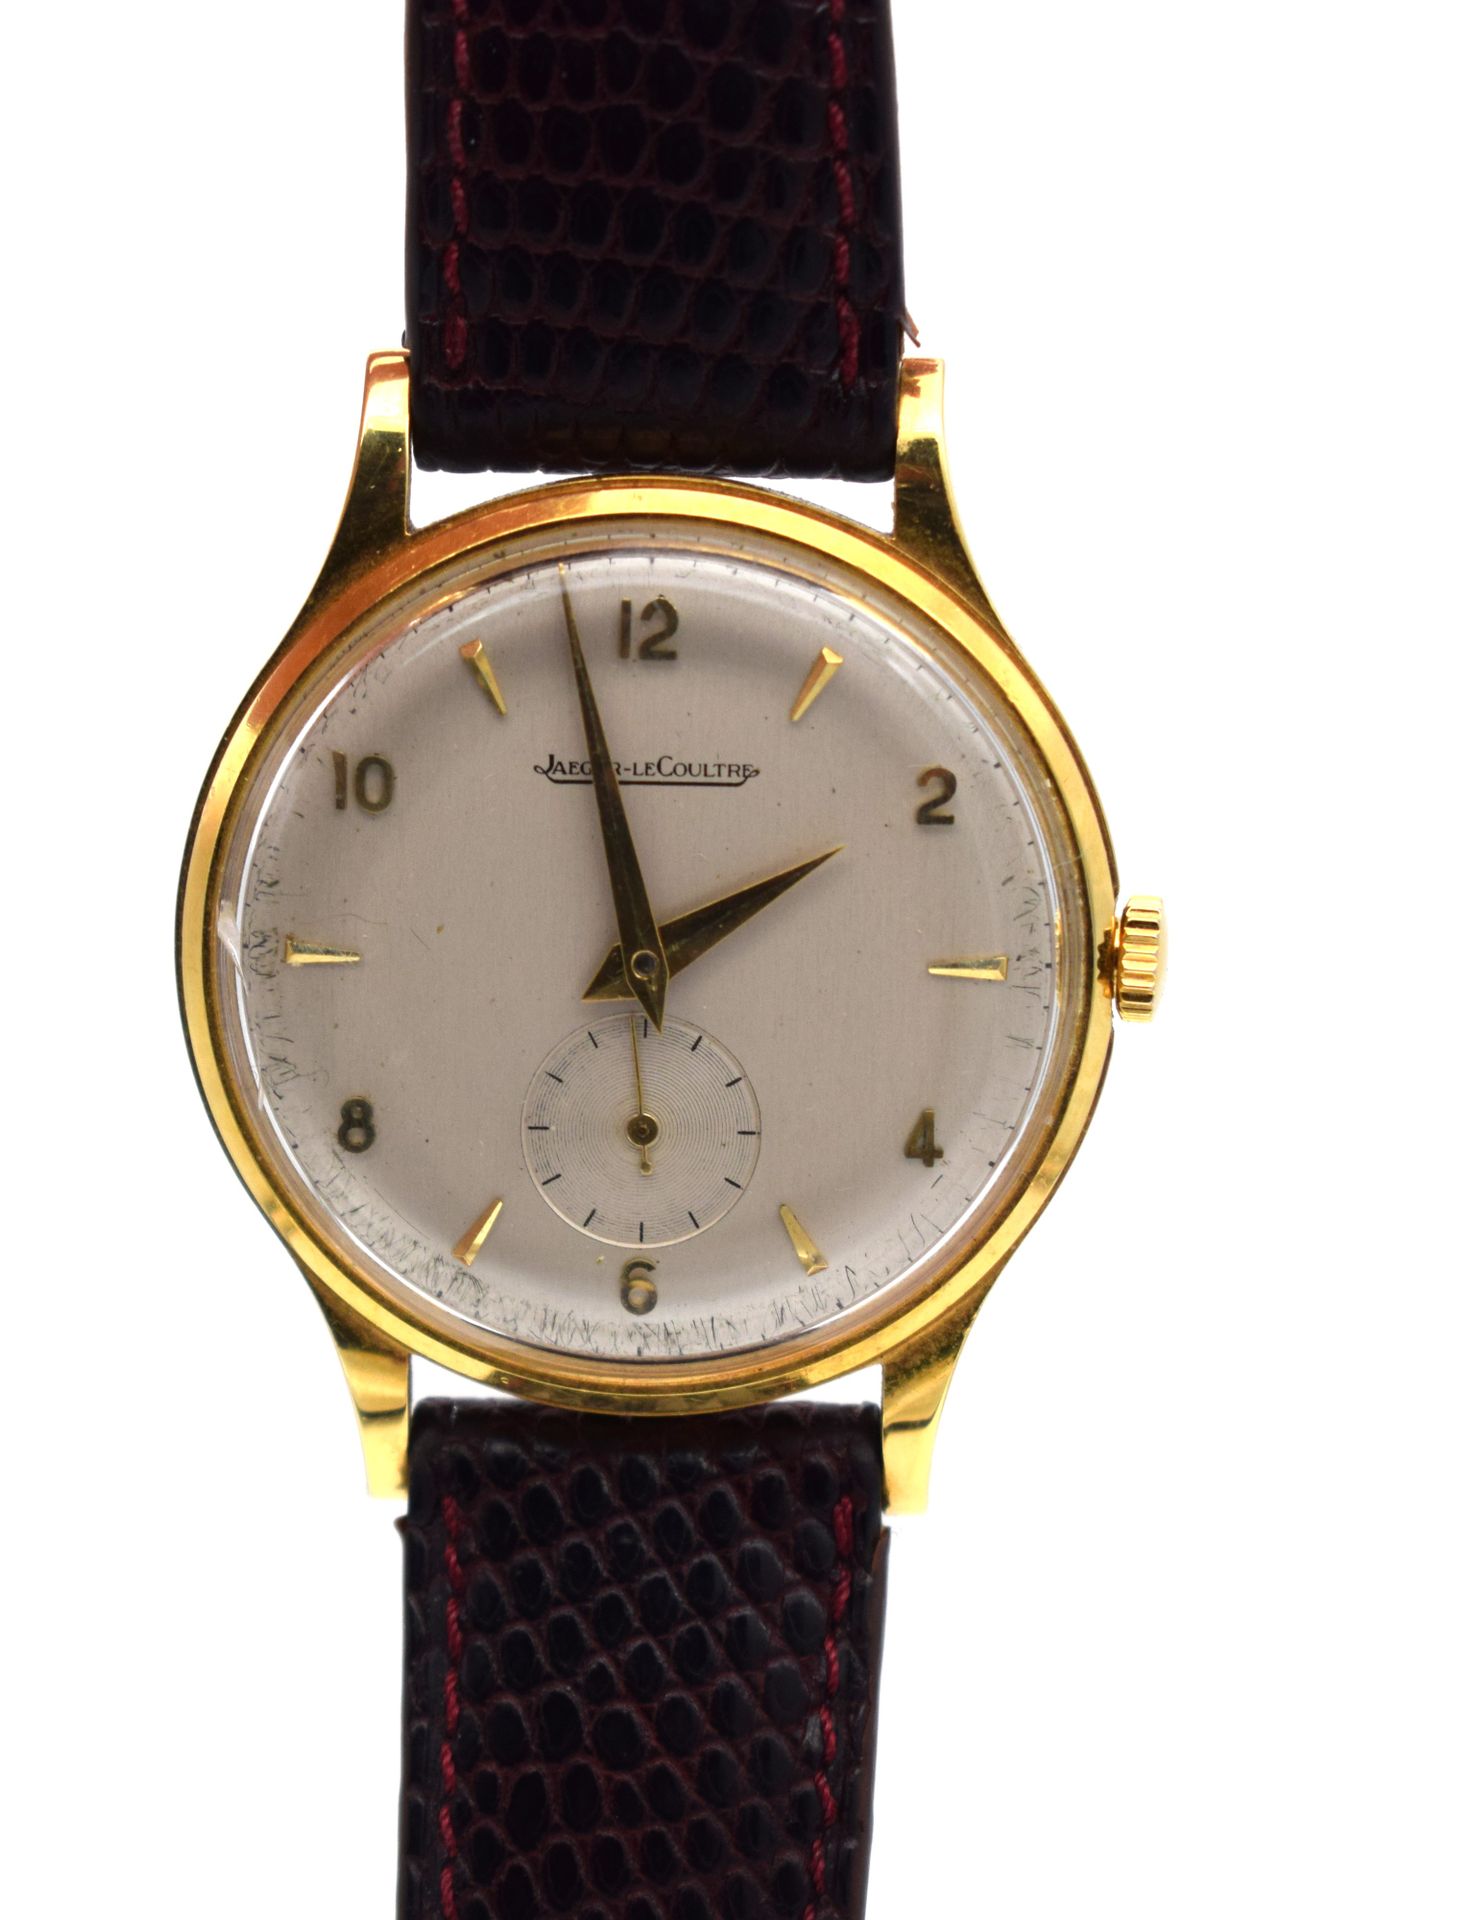 Null JAEGER-LECOULTRE watch in 18ct yellow gold (case and cover), offered by ARB&hellip;